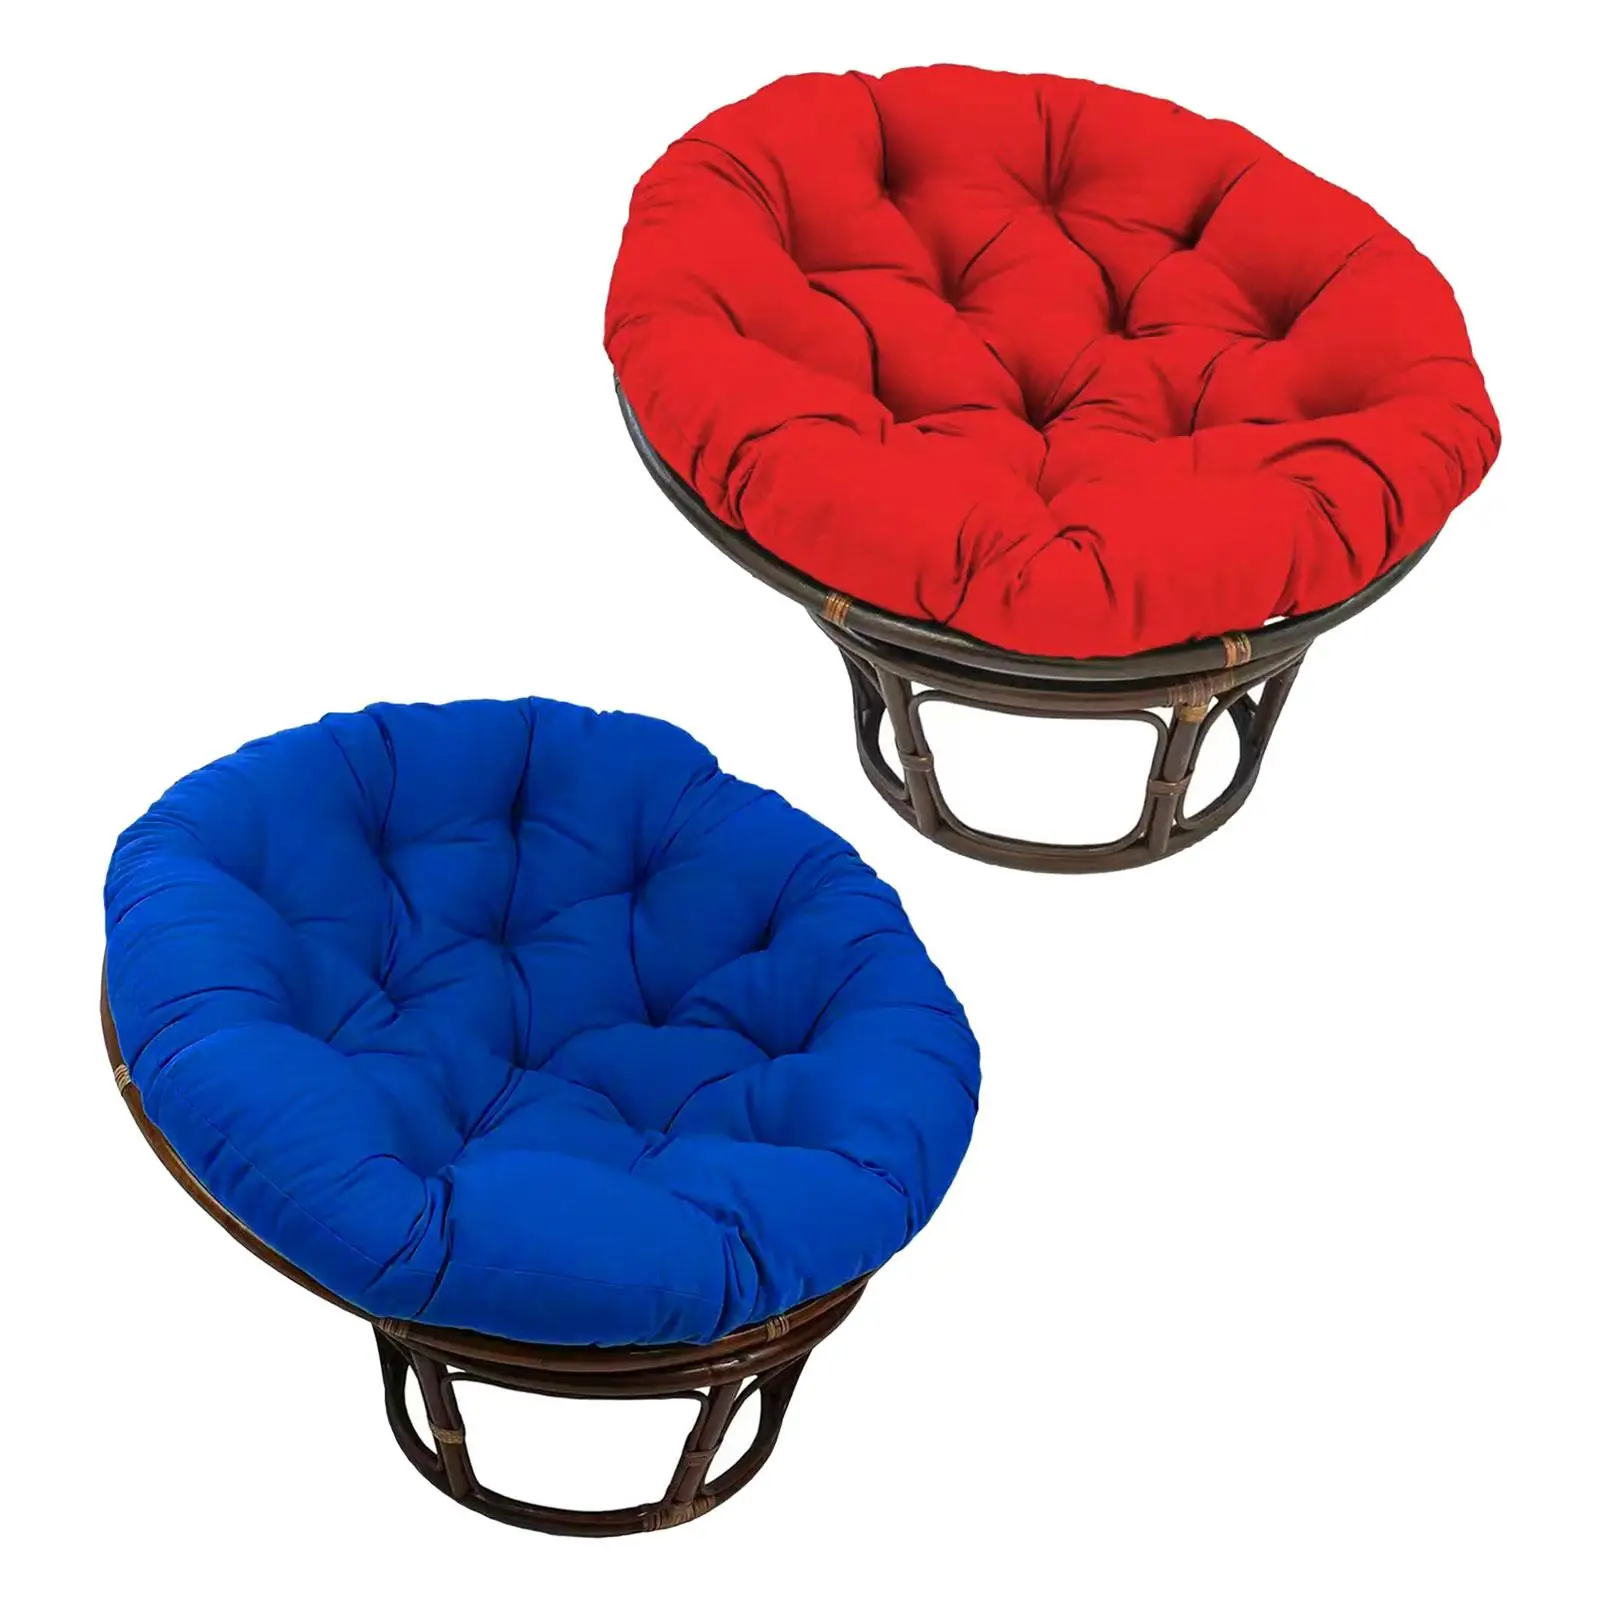 Egg Chair Swing Chair Pads Hammock Chair Cushions Thickened Overstuffed Round Cushion for Indoor or Outdoor Swing Chairs